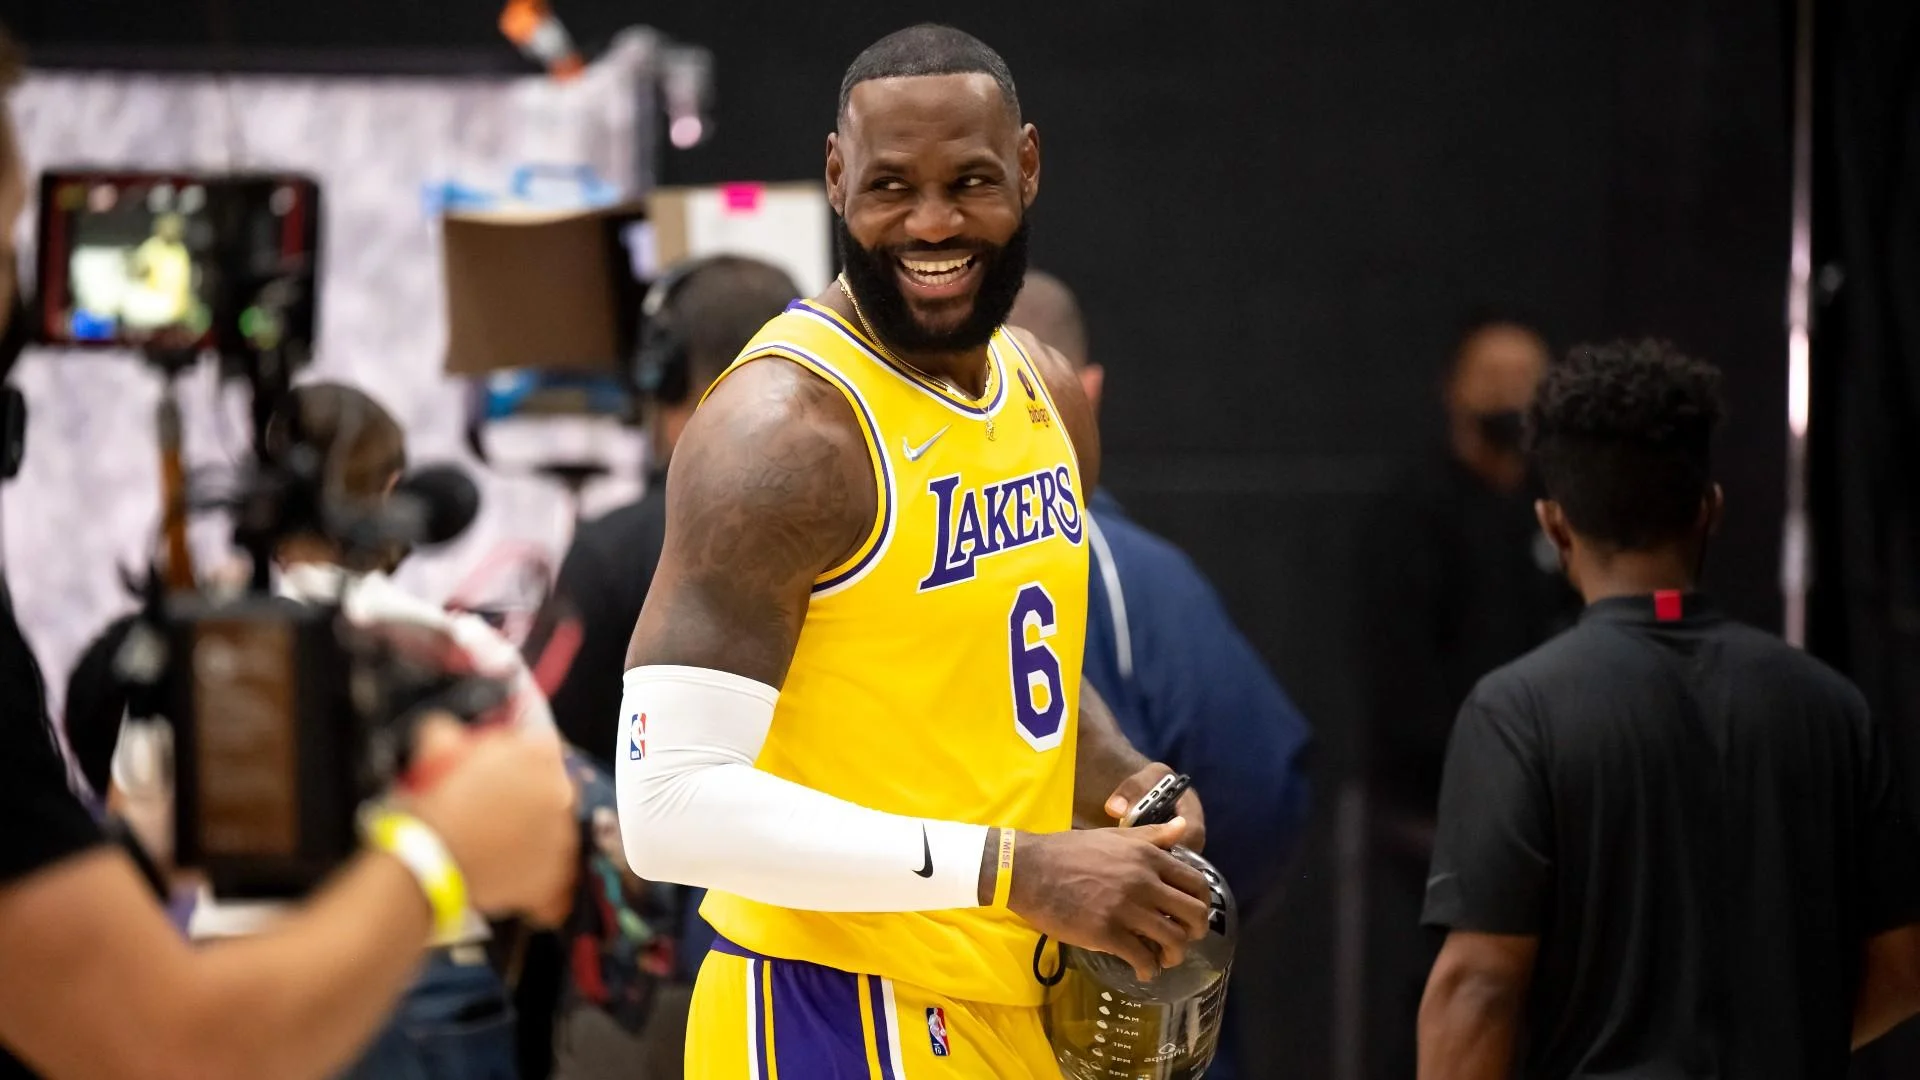 LeBron James injury updates amid Lakers matchup against the Blazers